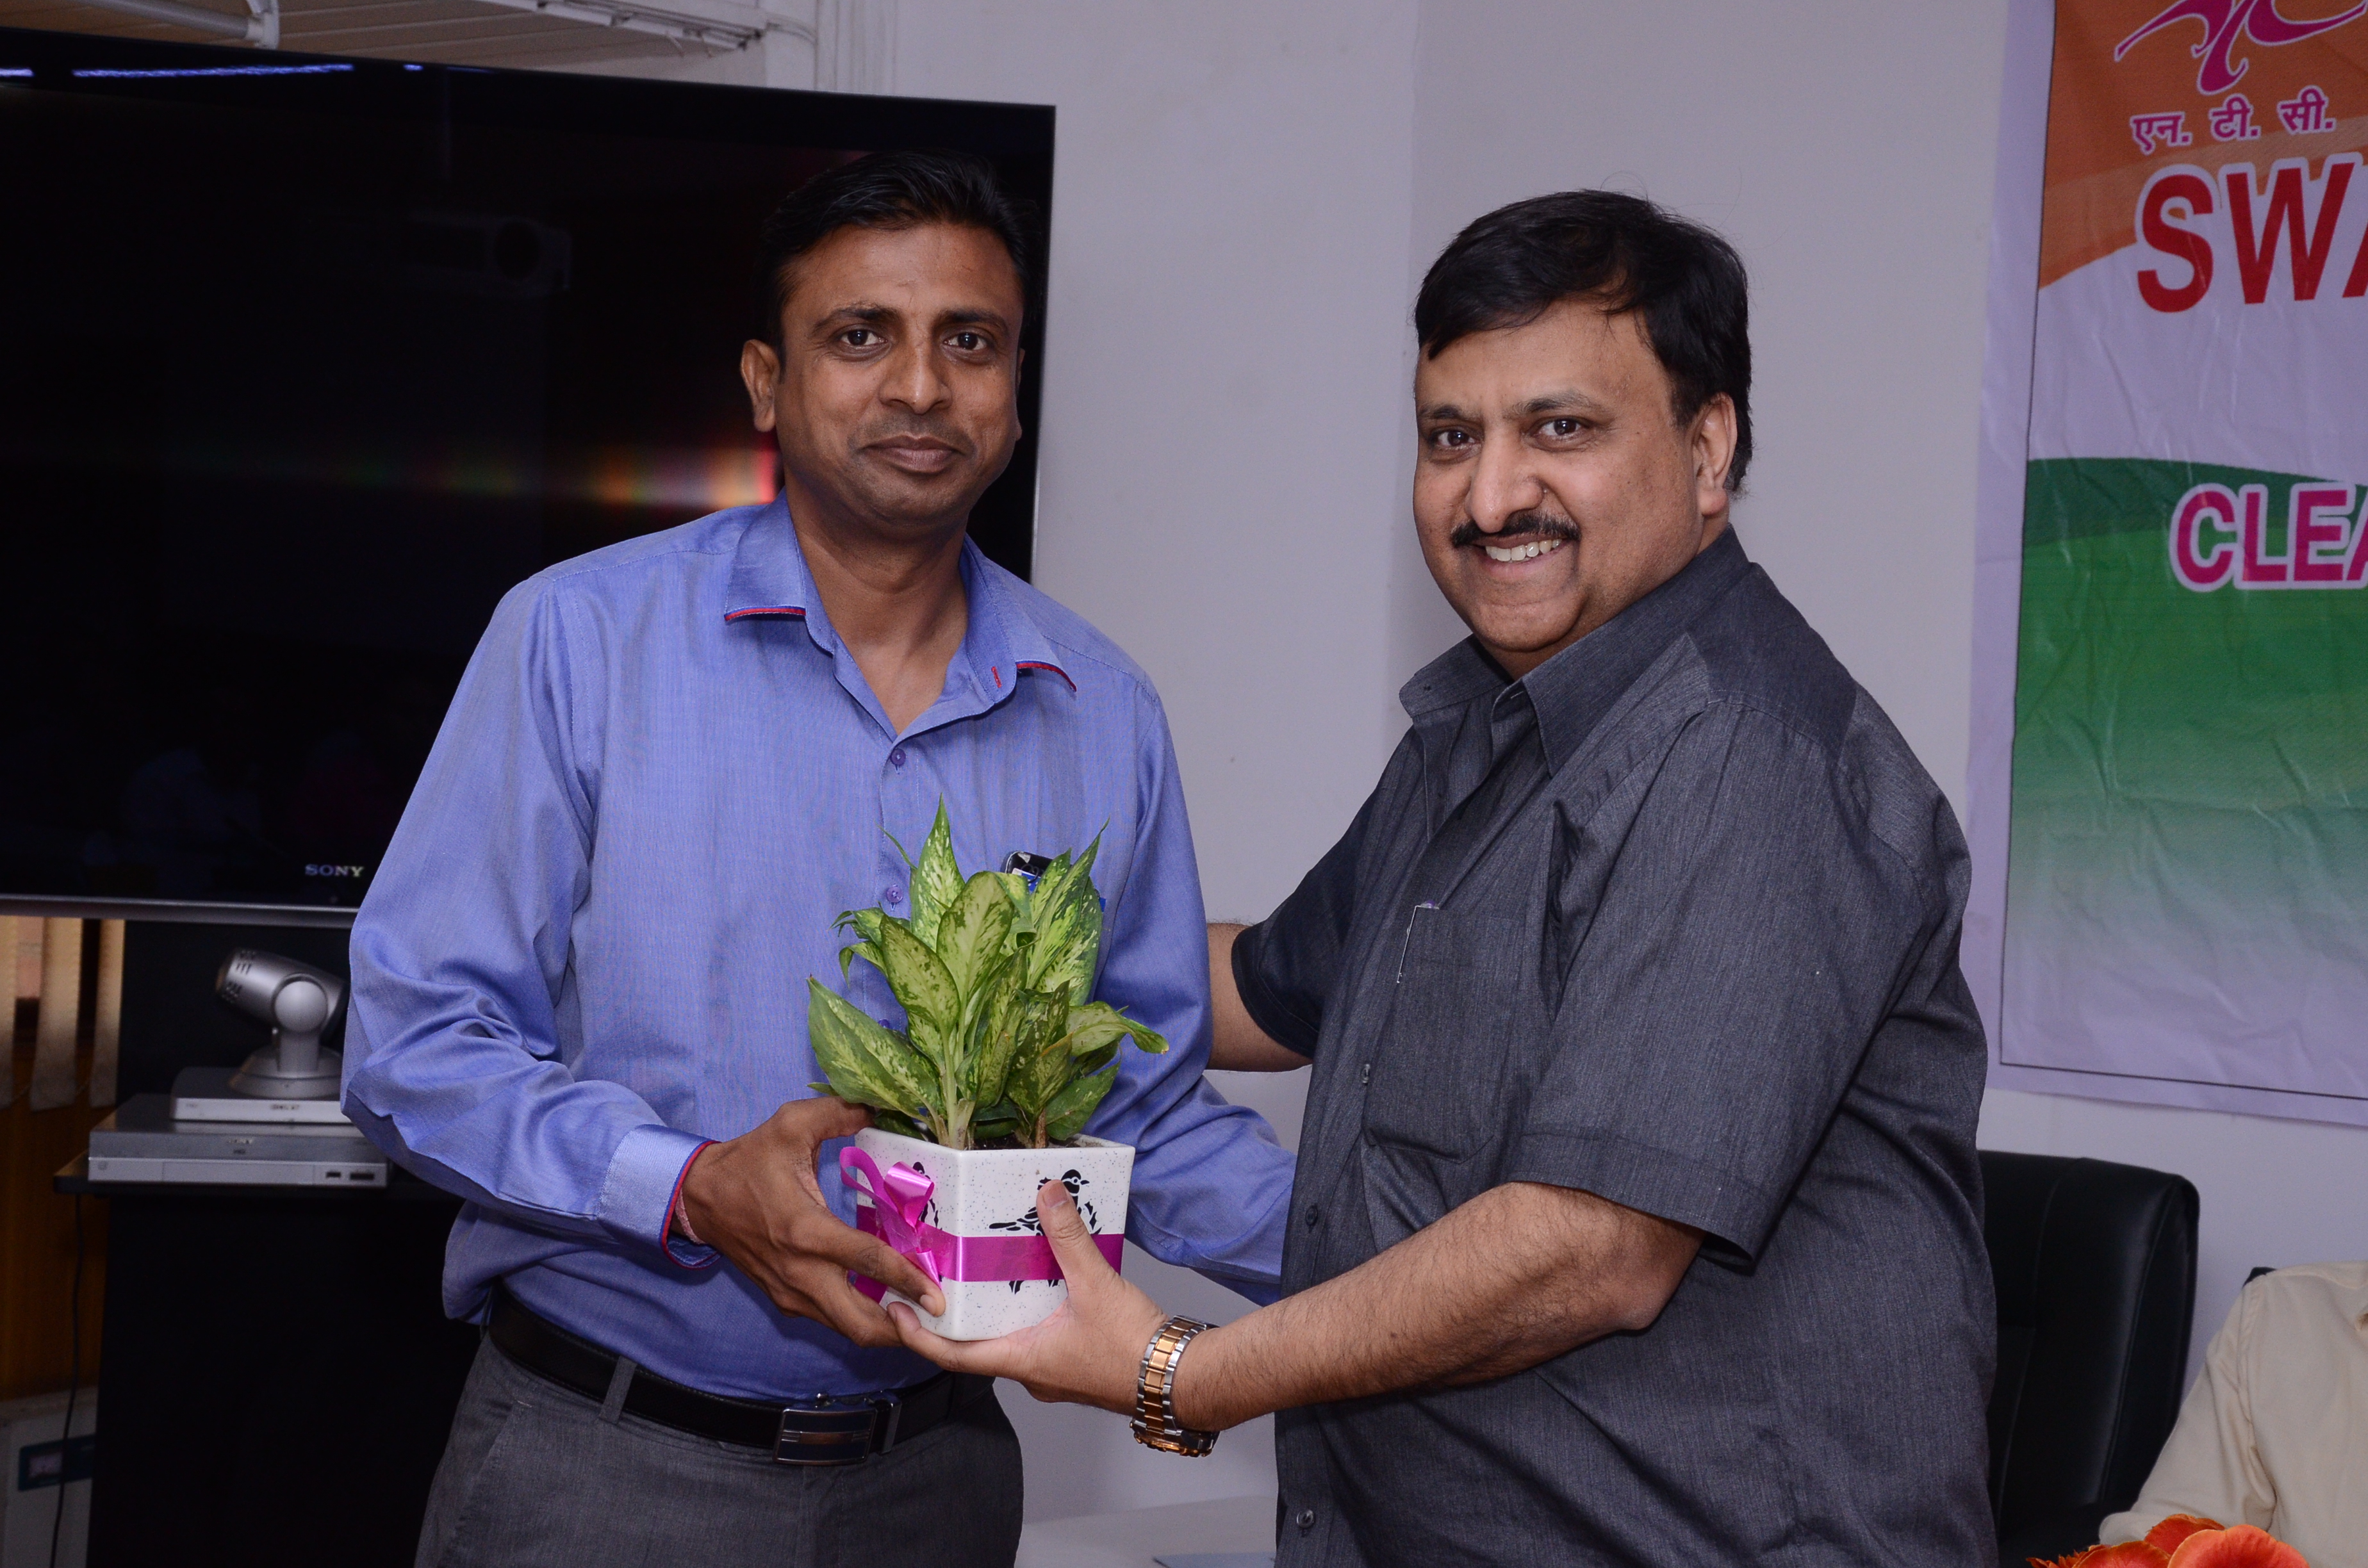 Dr. Anil Gupta, Director (Finance) welcomed the guest.